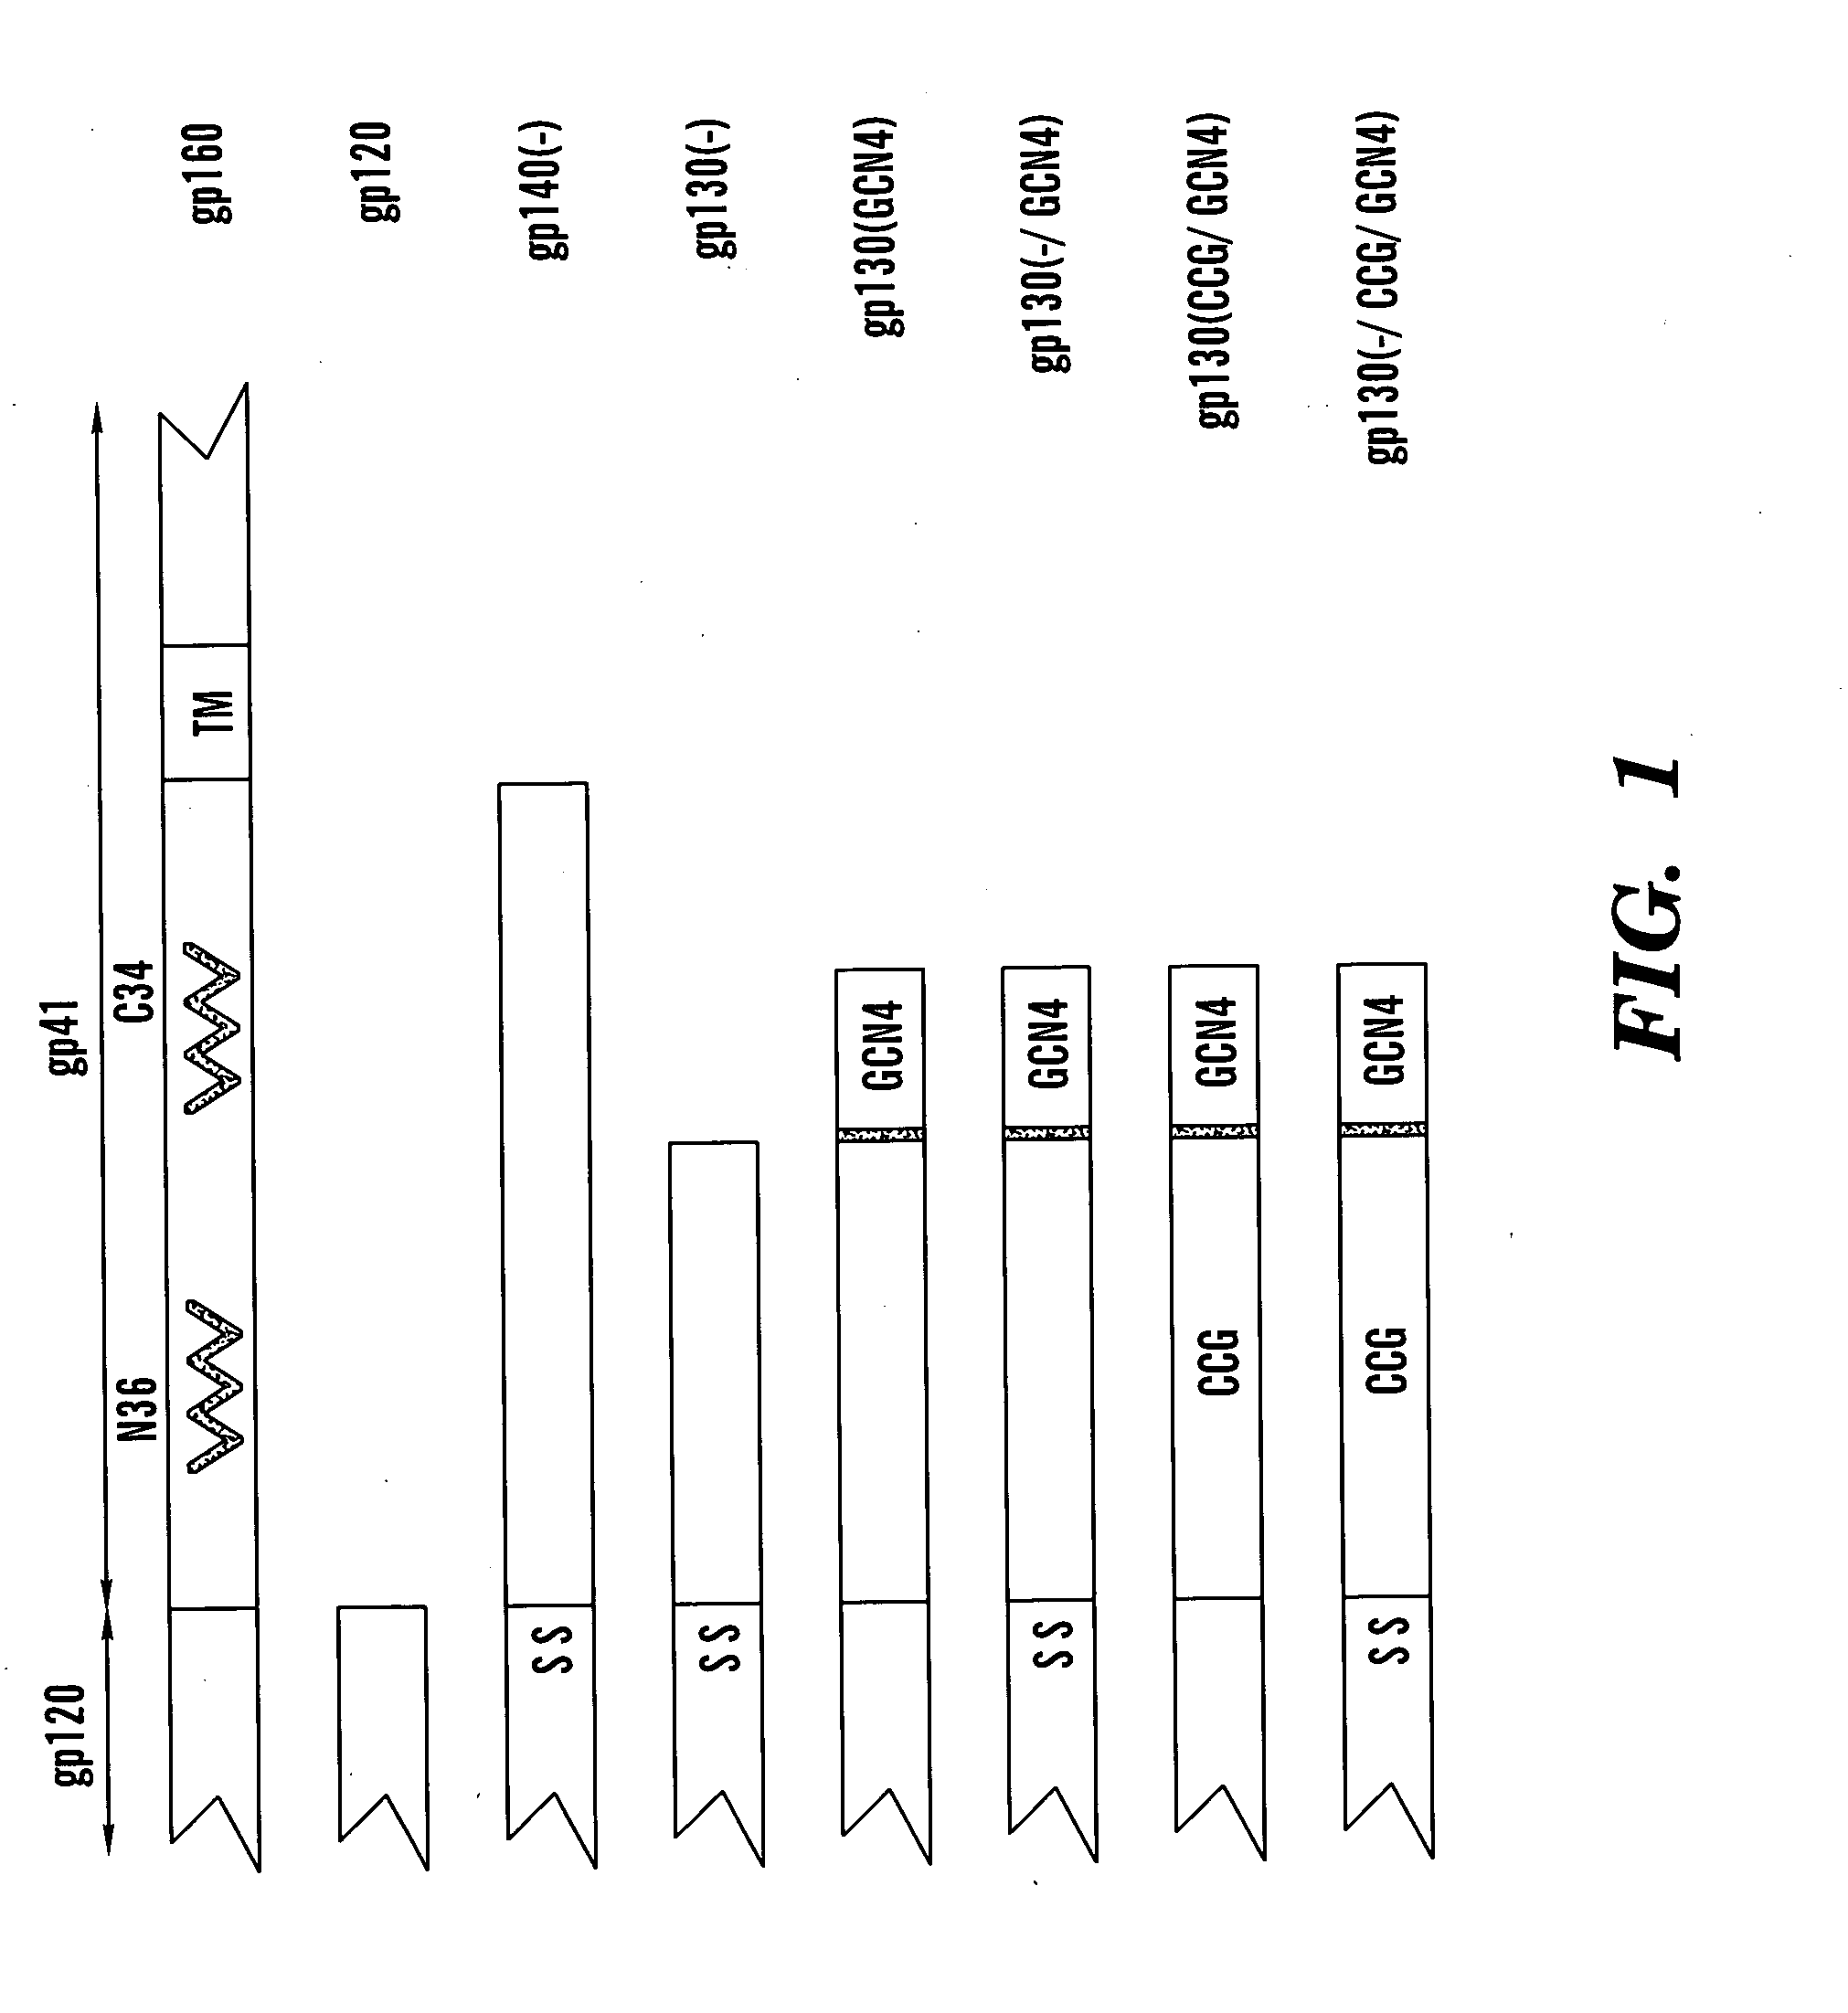 Stabilized soluble glycoprotein trimers